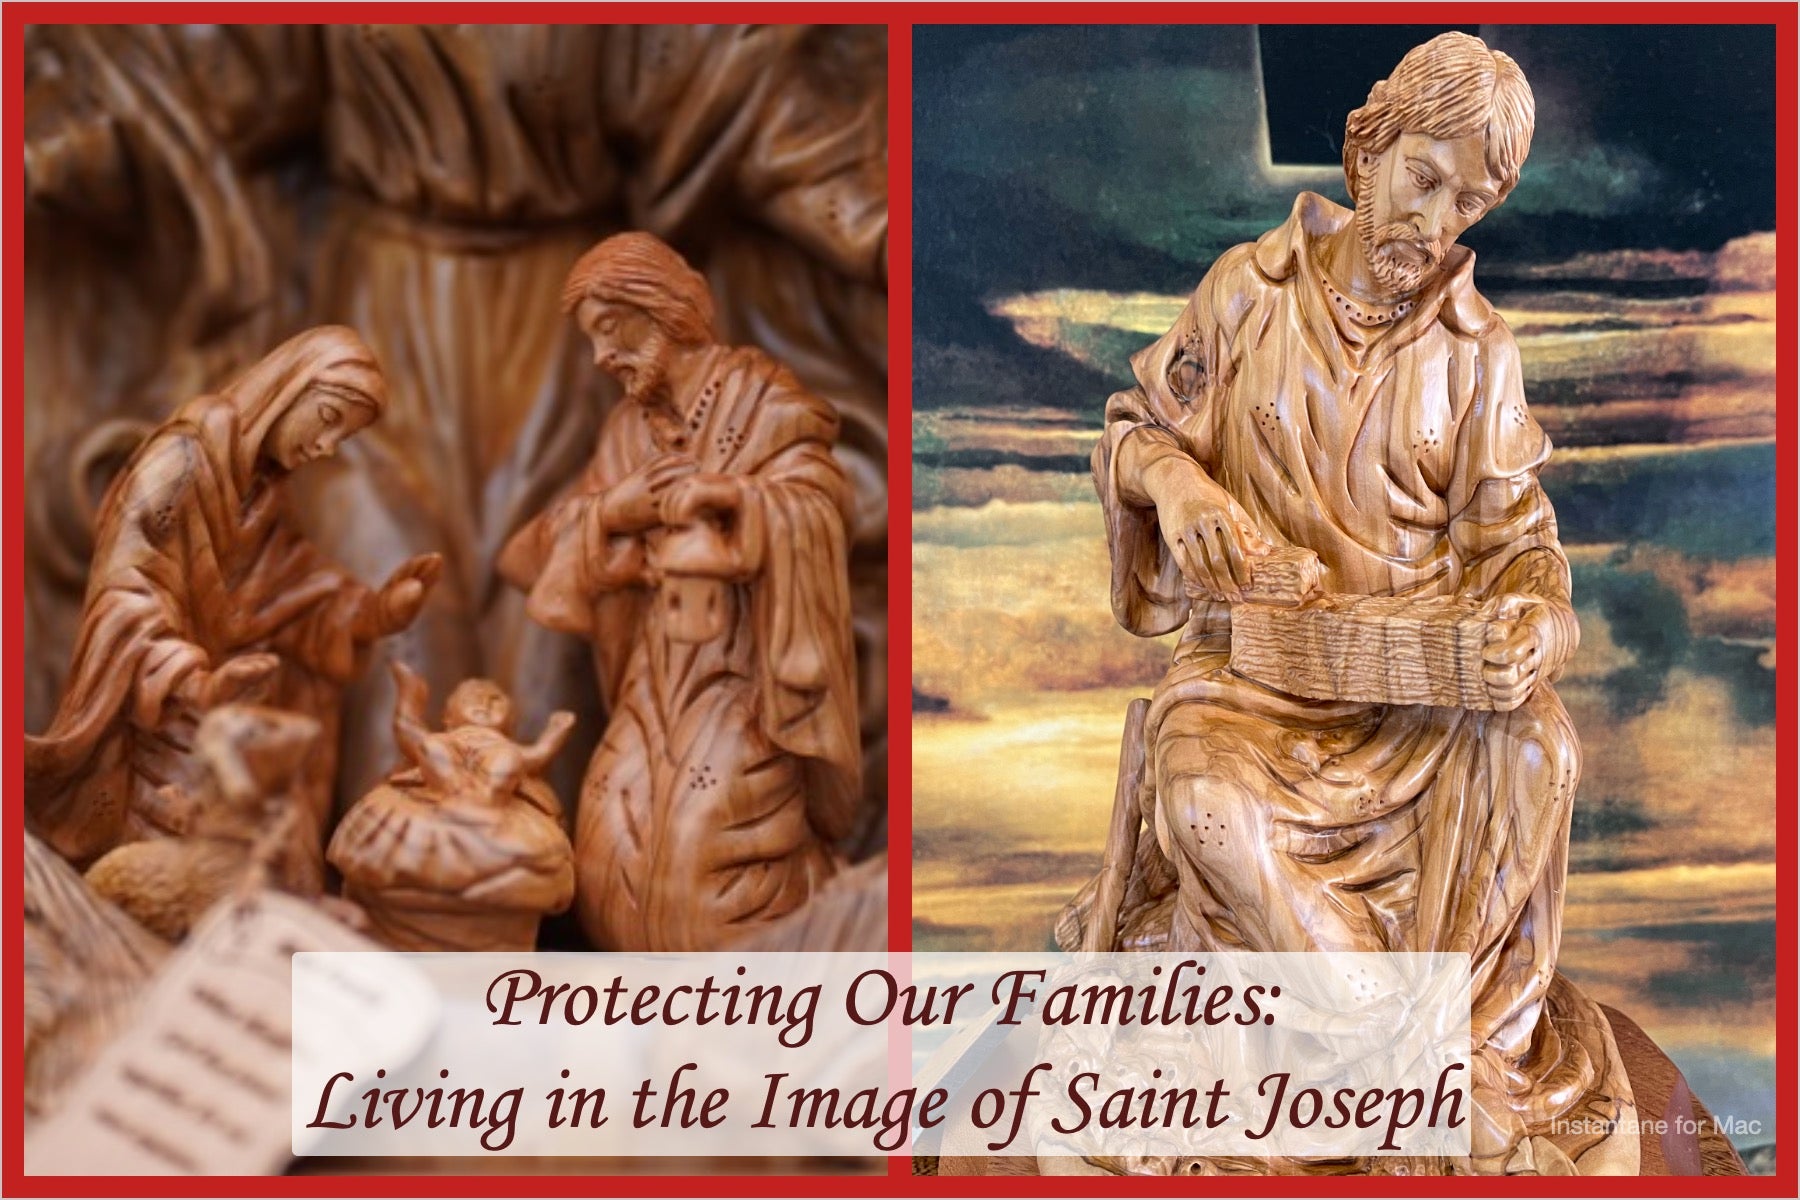 Protecting Our Families: How Living in the Image of St. Joseph Makes Better Men and Fathers